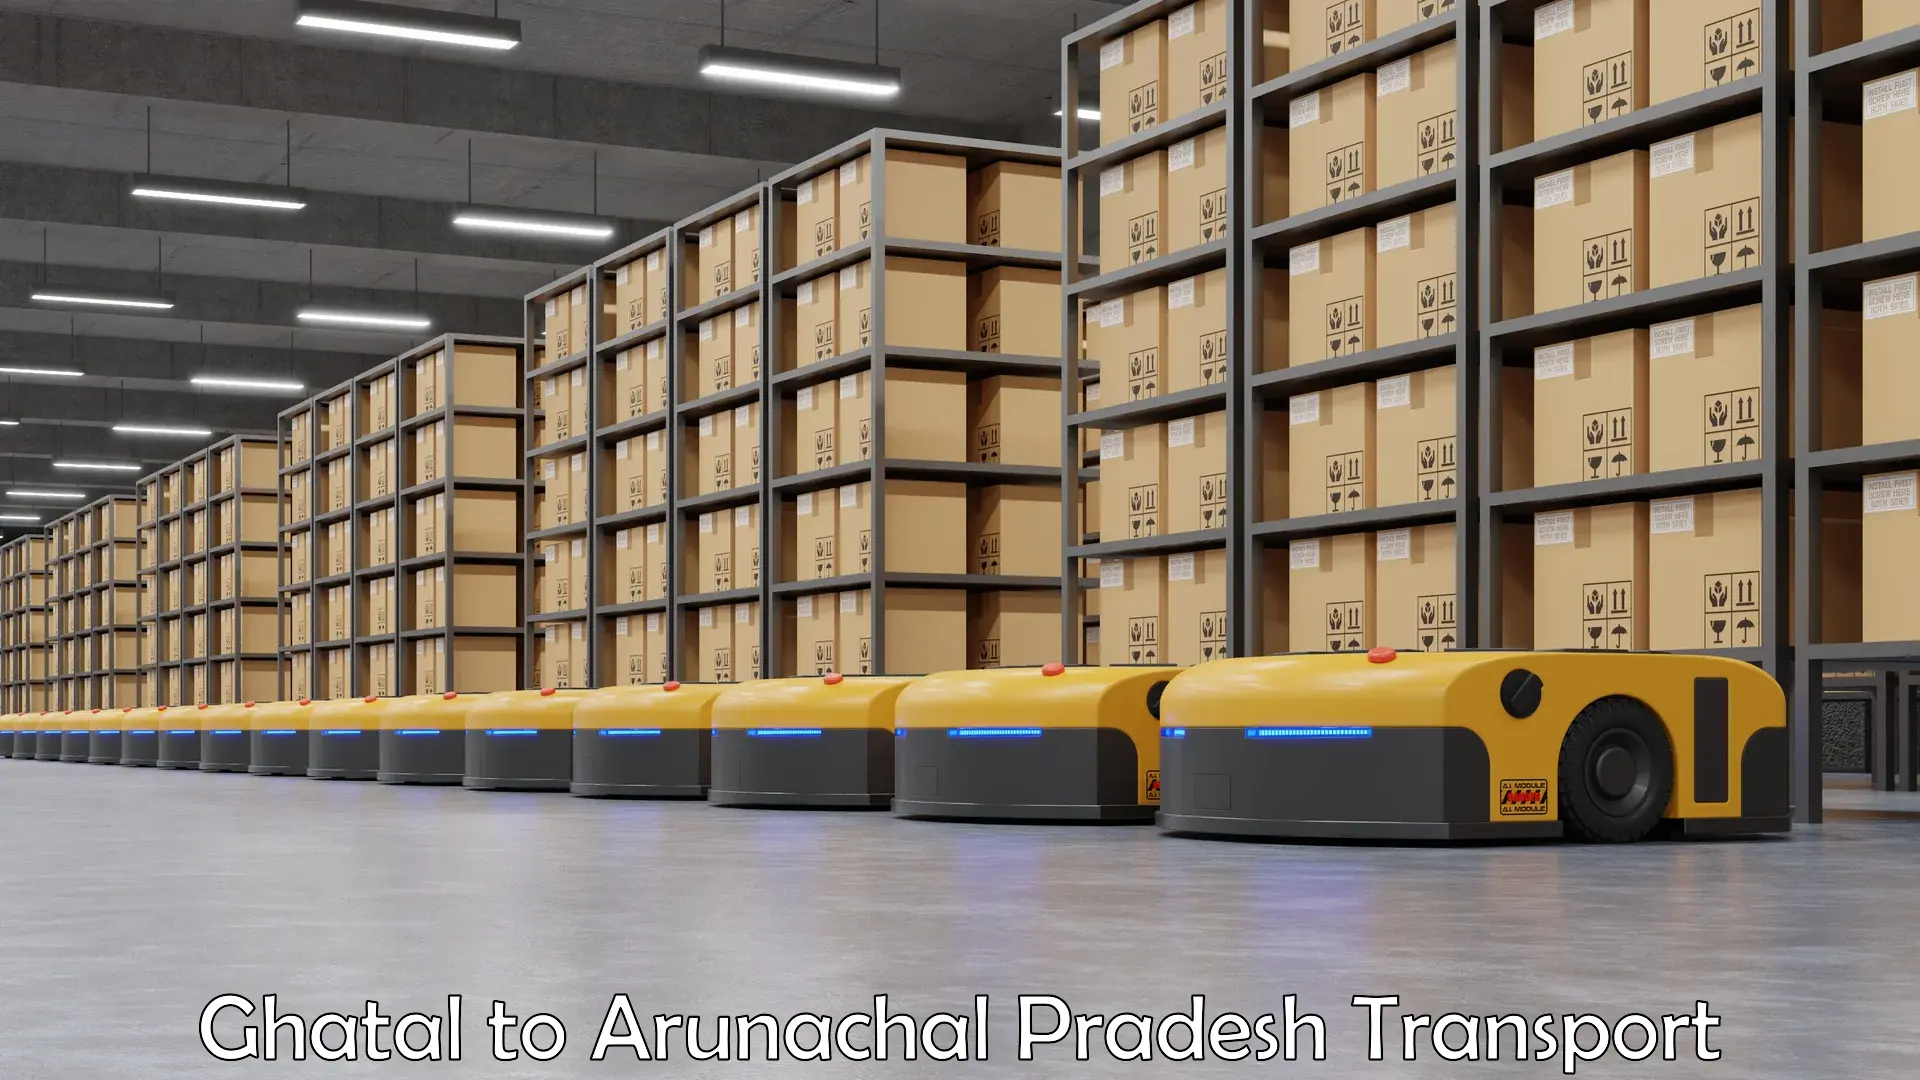 Truck transport companies in India Ghatal to Namsai